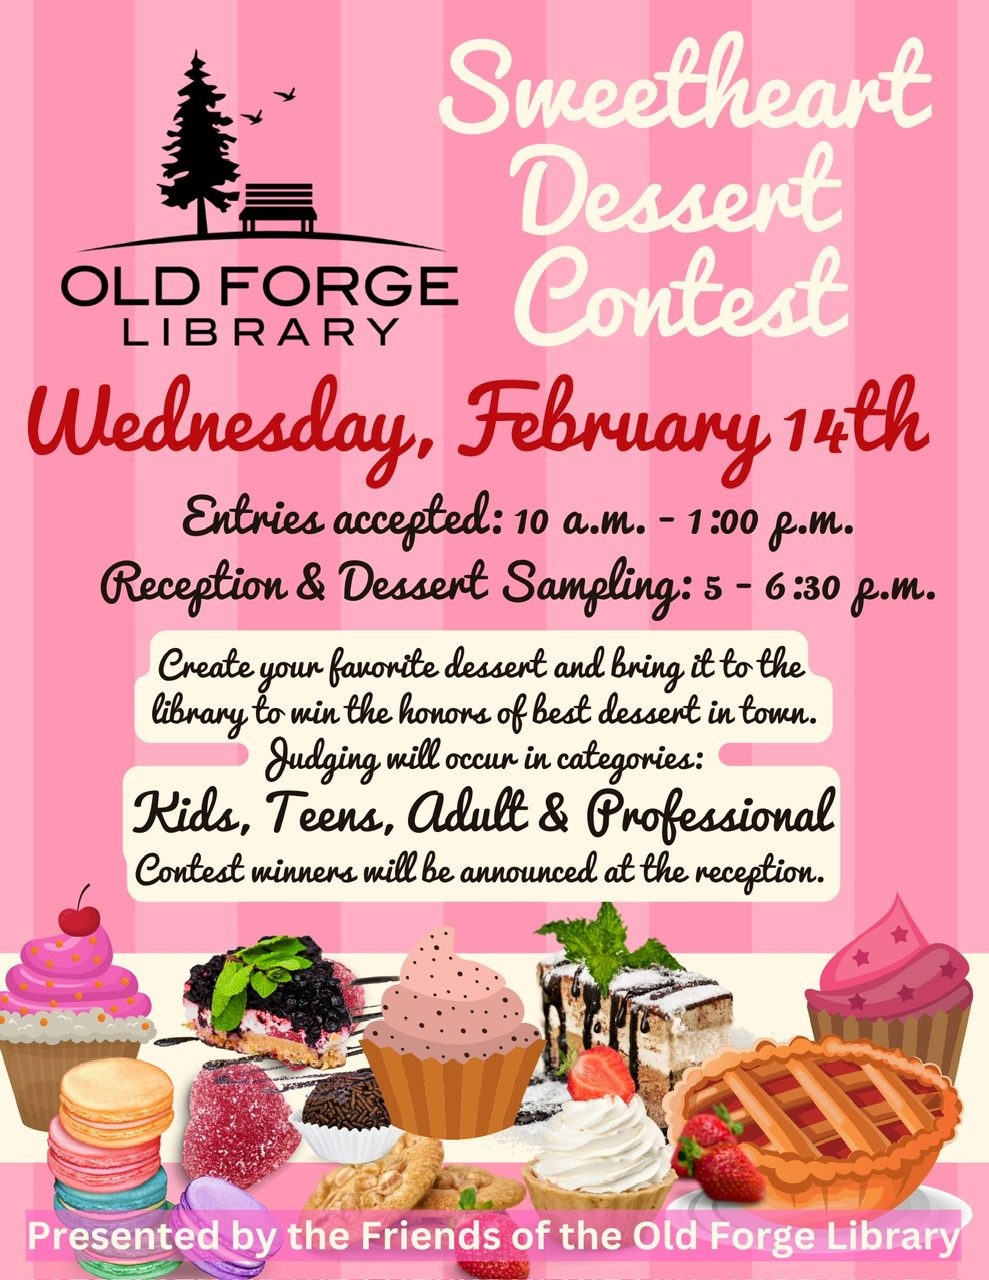 OLD FORGE LIBRARY VALENTINES DAY SWEETHEART DESSERT CONTEST